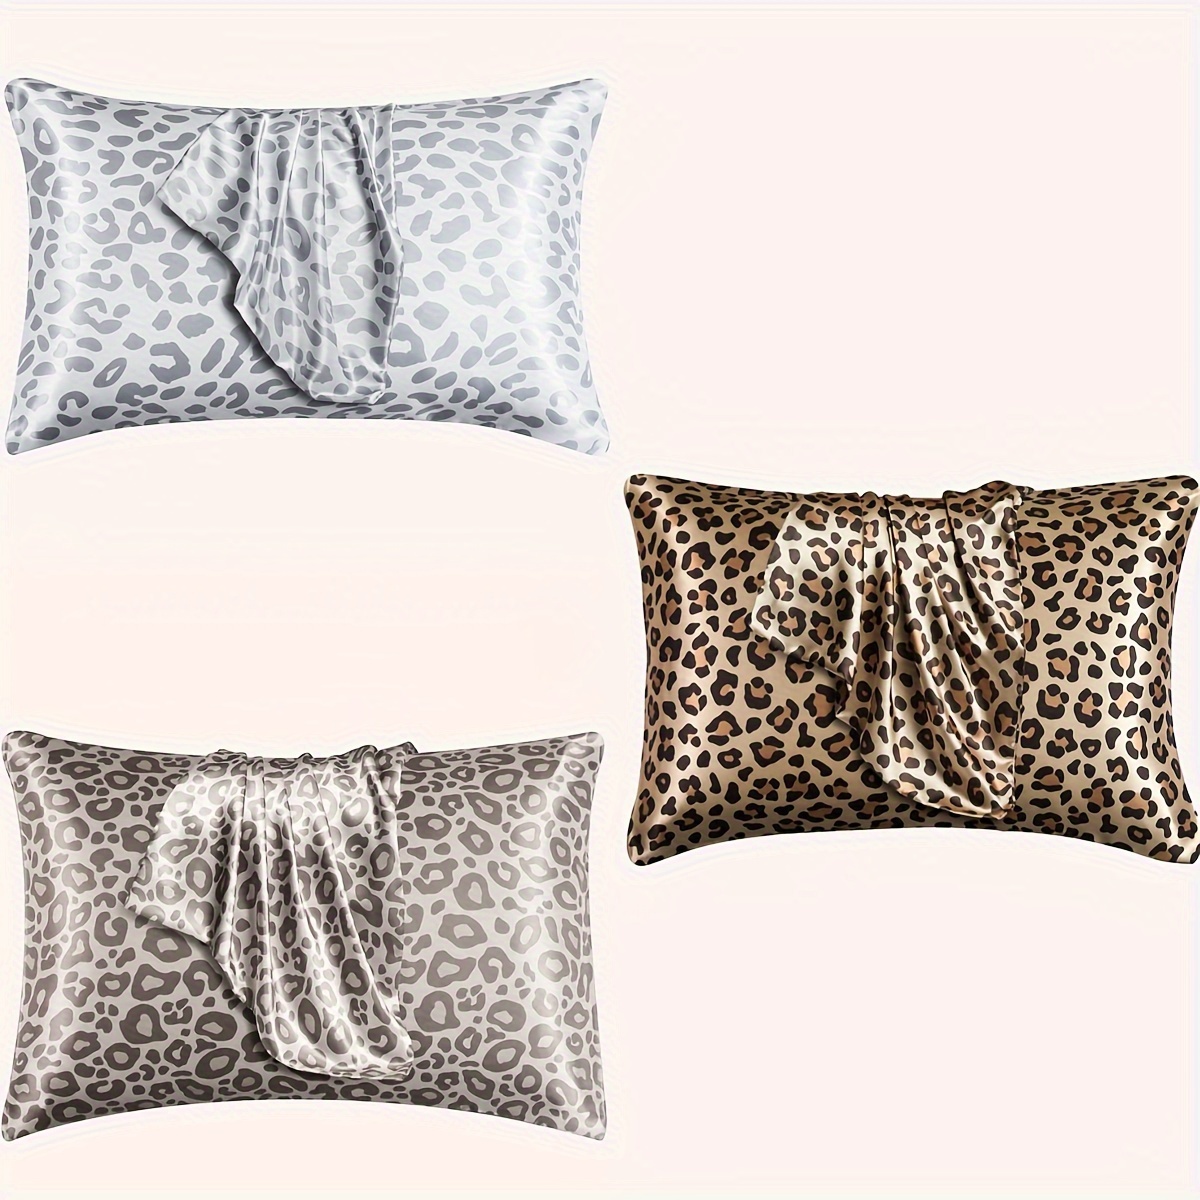 

2pcs Satin Pillowcase, Soft Leopard Print Pillow Cover For Sleeping, Pillow Case With Envelope Opening Design, Bedding